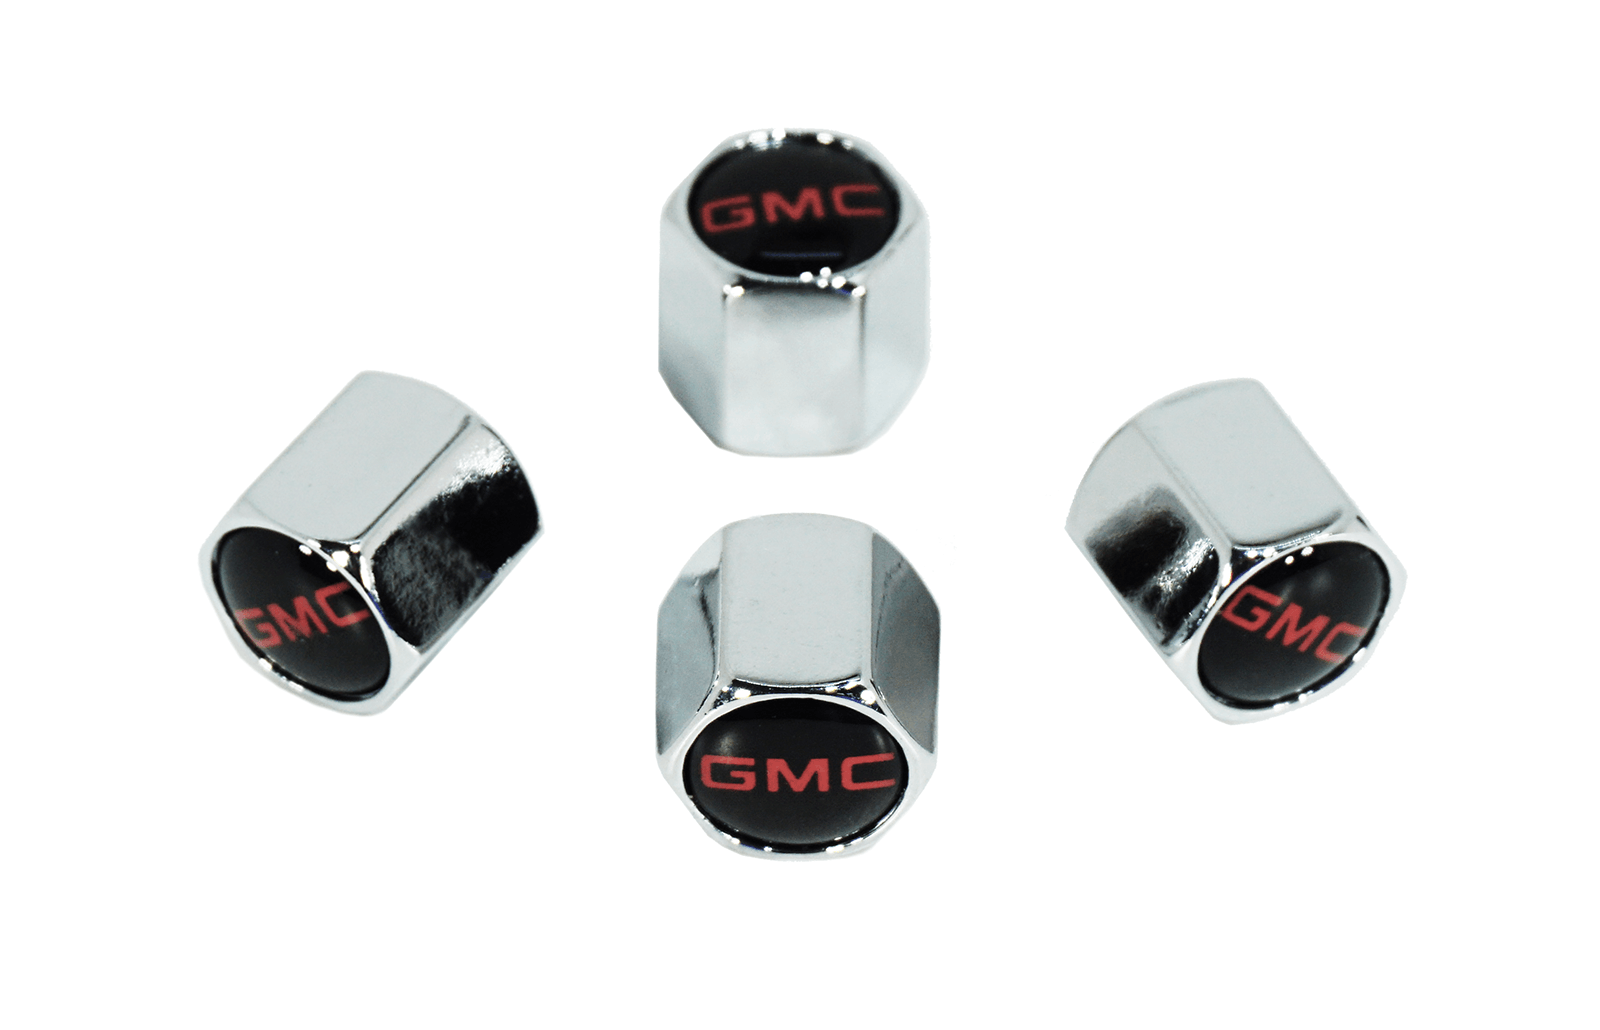 Chrome Valve Stem Tire Caps, Style: GMC  Wheel Rim Exterior Upgrade Performance Accessory Car Show Vehicle Auto AWD Turbo ZSPEC Dress Up Bolts Competition Rally Racing Truck Van Pickup 4x4 4WD